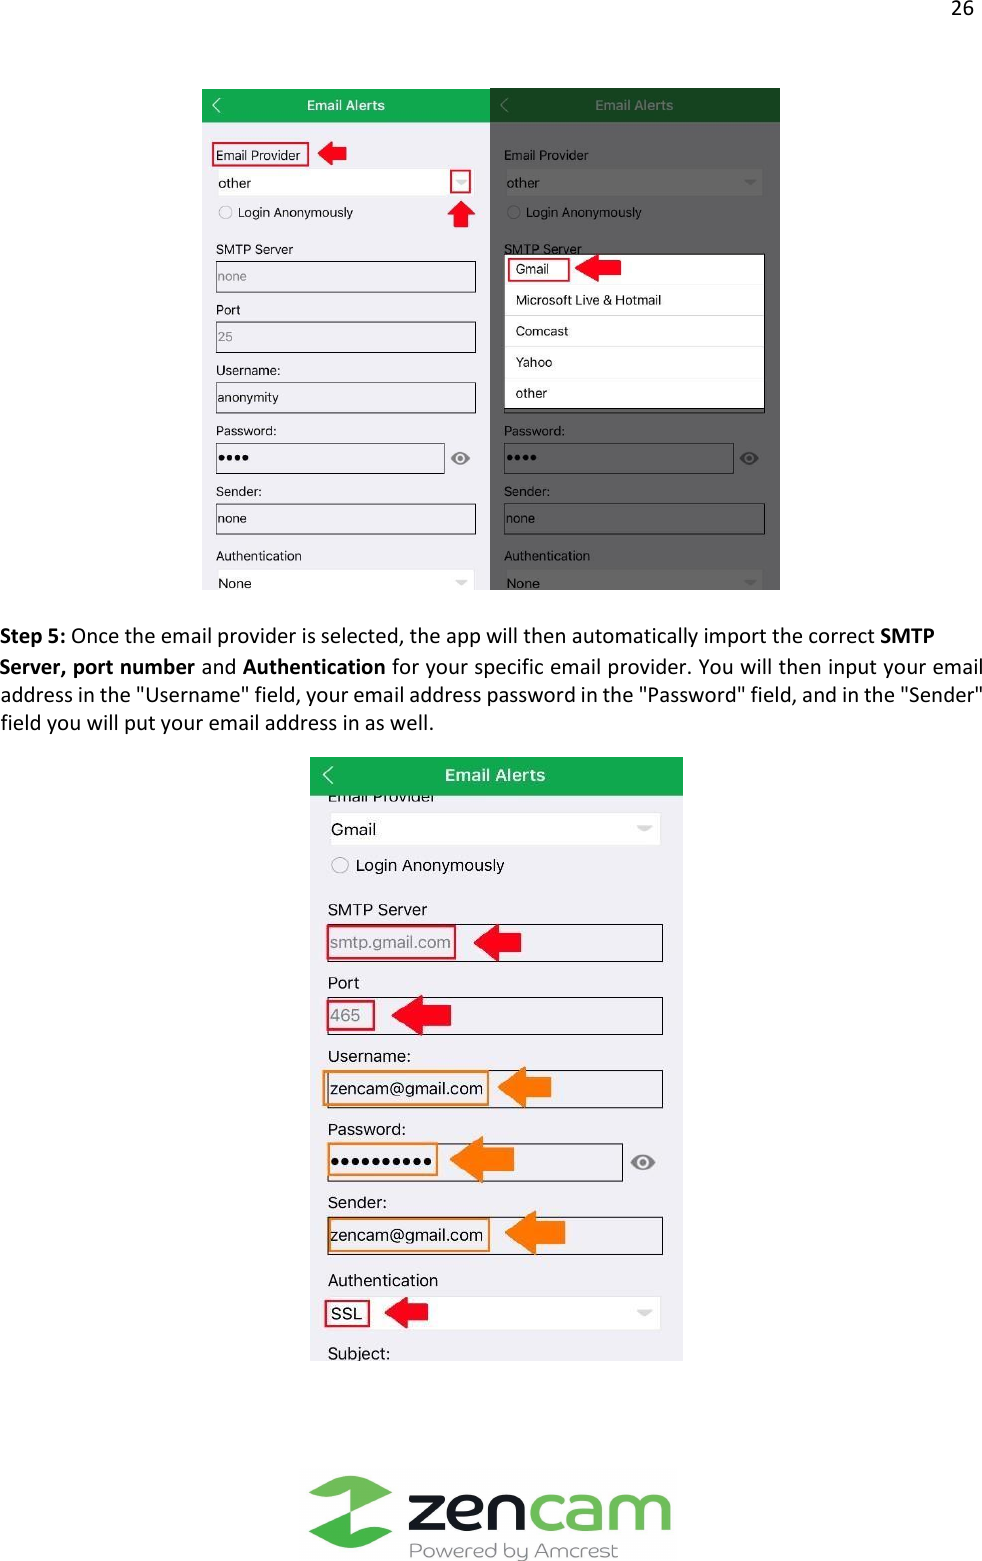                  26                                                                                                               Step 5: Once the email provider is selected, the app will then automatically import the correct SMTP   Server, port number and Authentication for your specific email provider. You will then input your email address in the &quot;Username&quot; field, your email address password in the &quot;Password&quot; field, and in the &quot;Sender&quot; field you will put your email address in as well.       